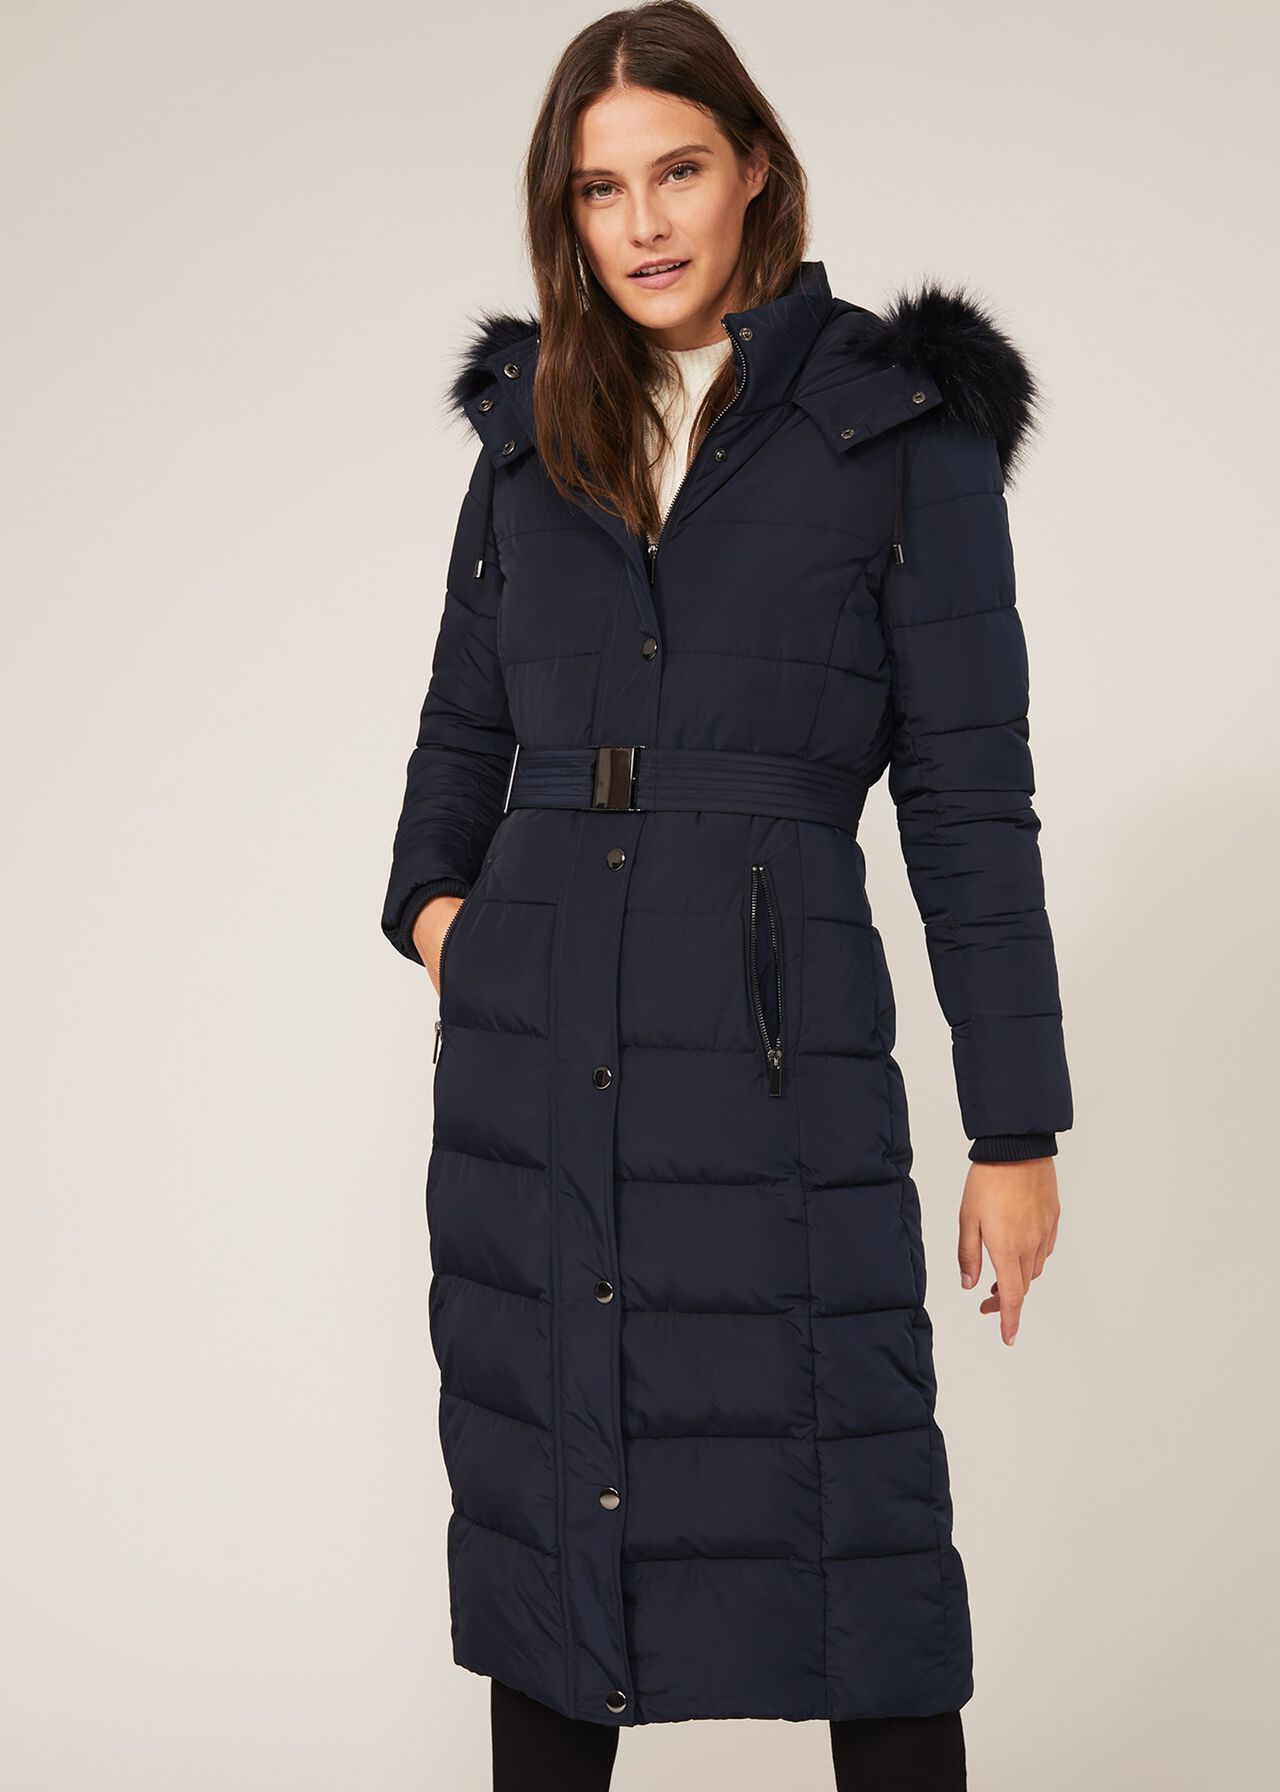 Mabel Maxi Puffer Coat | Phase Eight